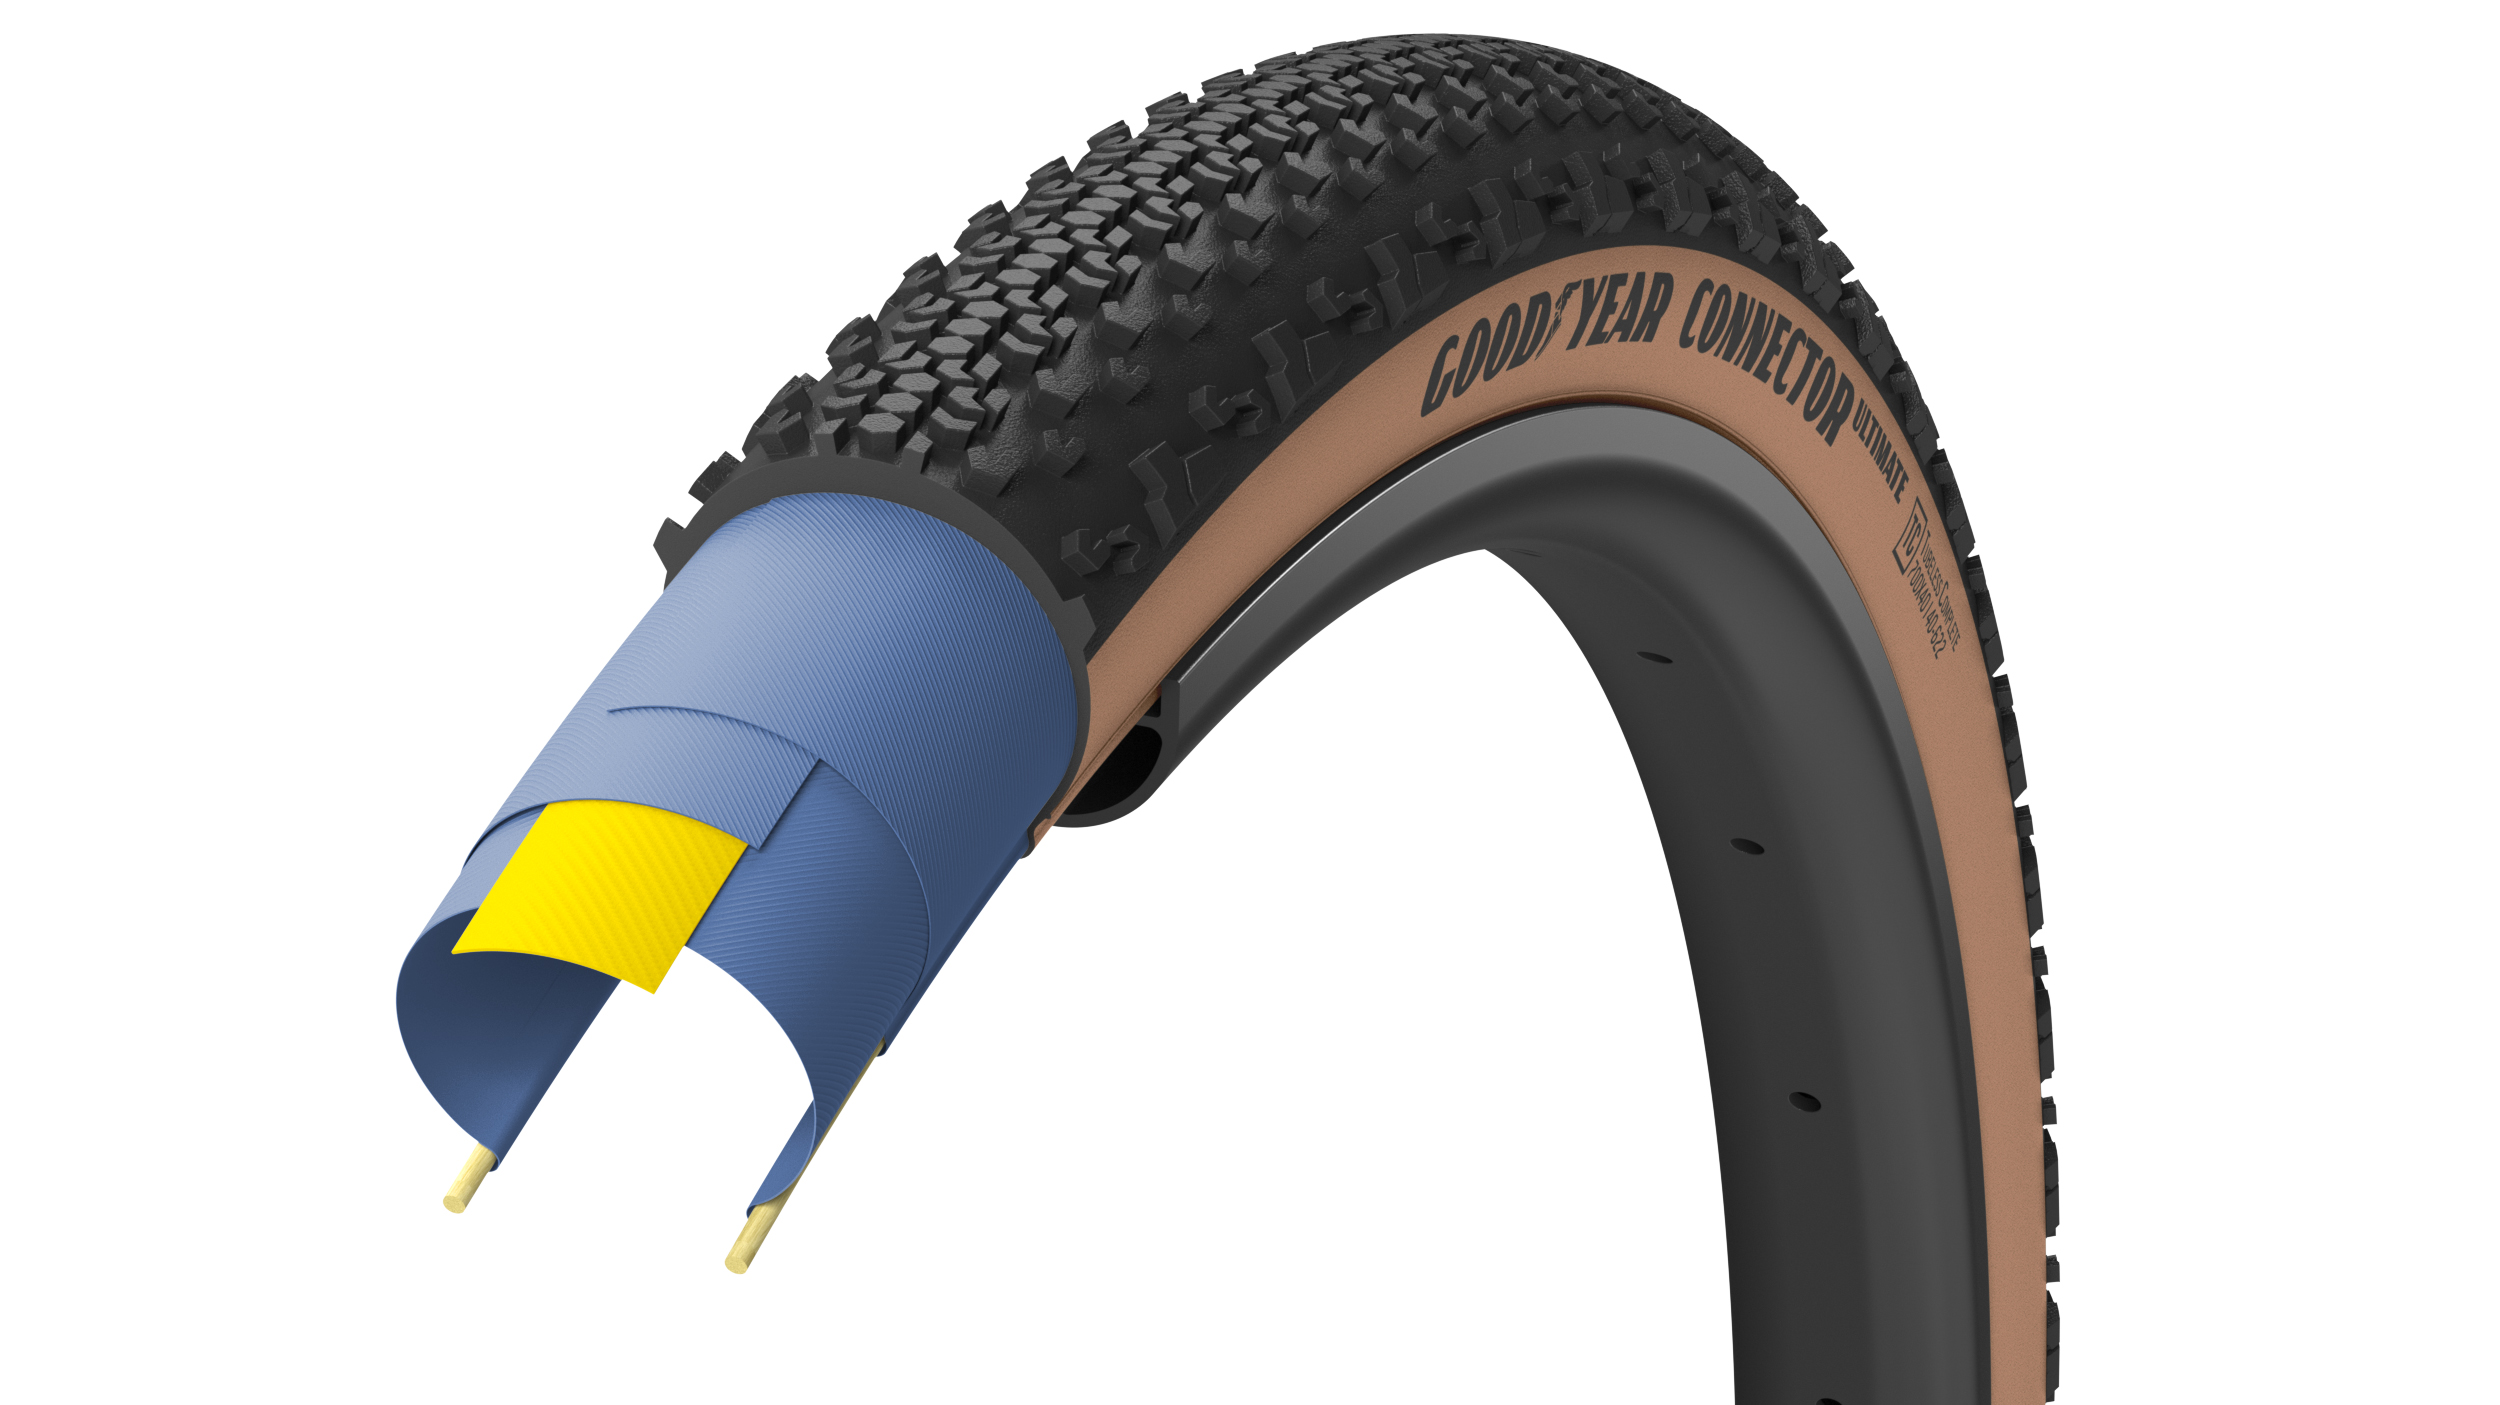 Покришка 700x40 (40-622) GoodYear CONNECTOR tubeless complete, folding, black/tan, 120tpi фото 